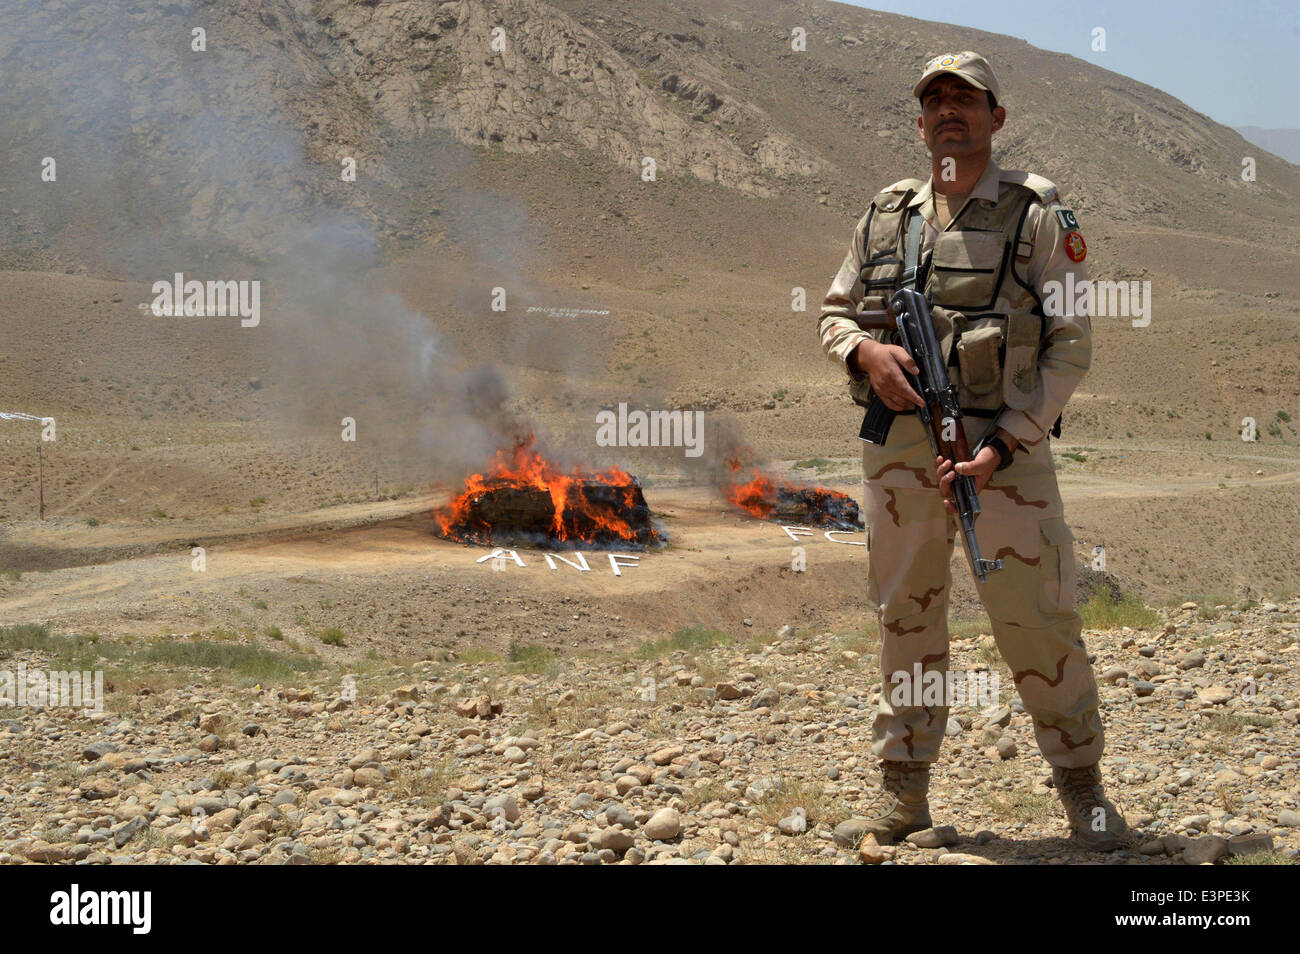 Quetta. 26th June, 2014. A Pakistani paramilitary soldier stands guard beside a burning pile of drugs during a ceremony to mark the International Day Against Drug Abuse and Illicit Trafficking, in southwest Pakistan's Quetta on June 26, 2014. Credit:  Irfan/Xinhua/Alamy Live News Stock Photo